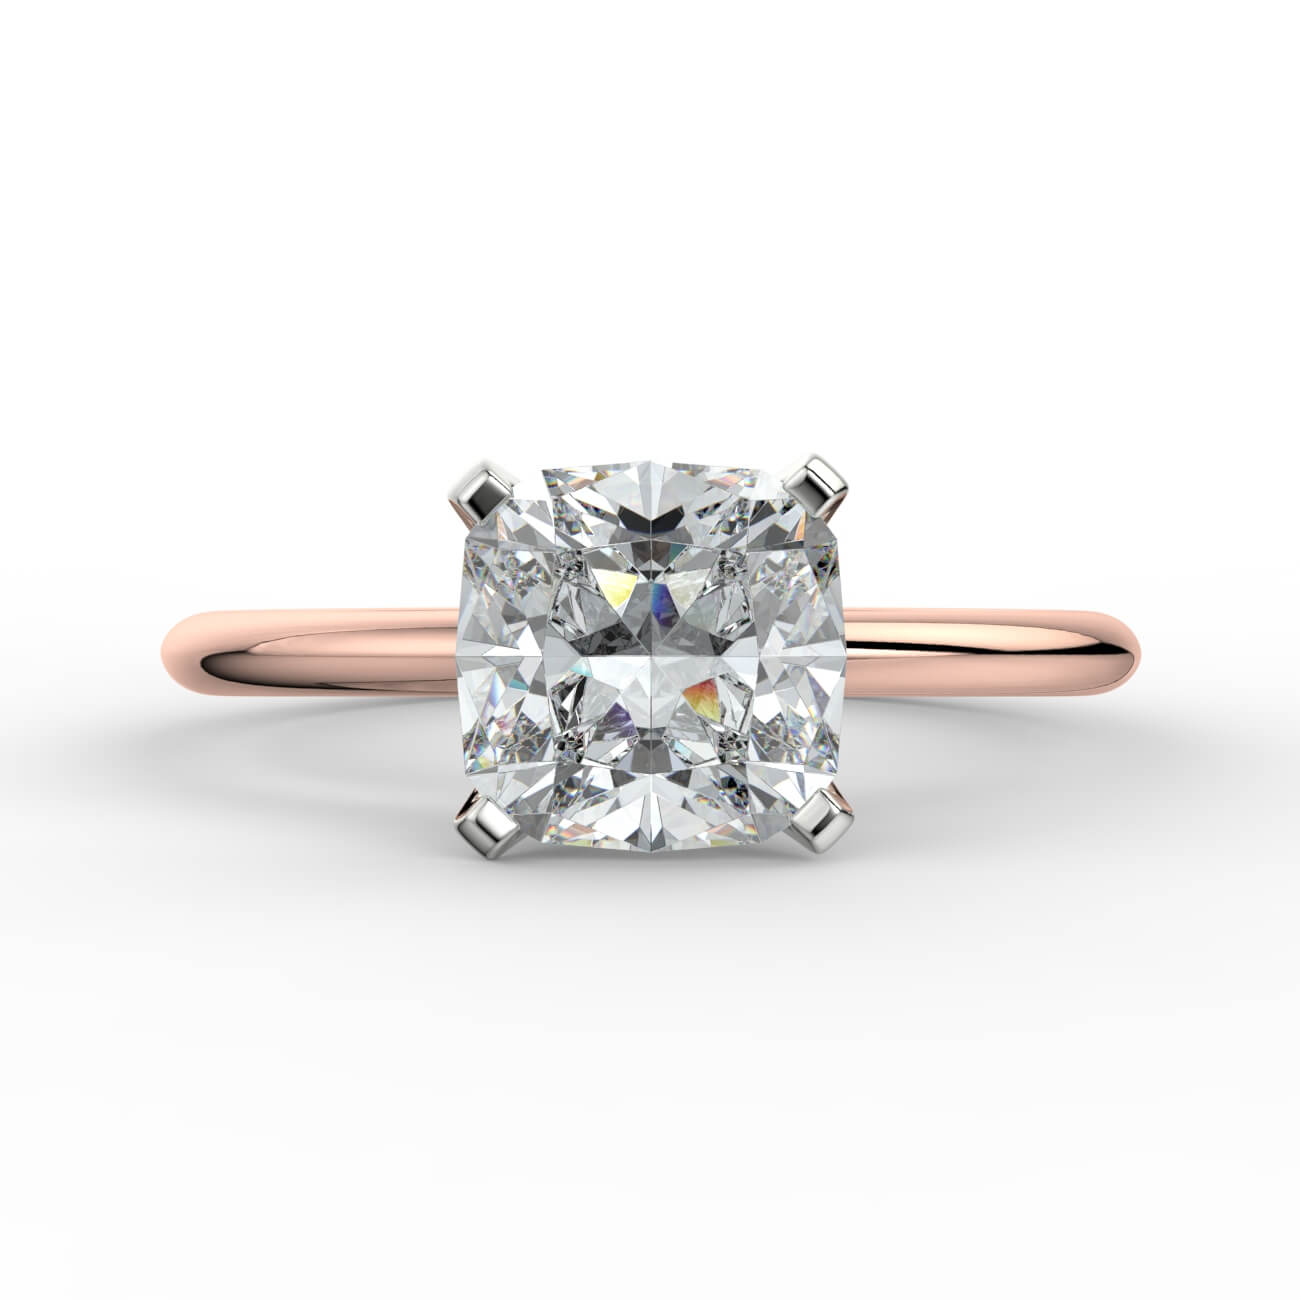 Knife-edge solitaire cushion cut diamond engagement ring in white and yellow gold – Australian Diamond Network